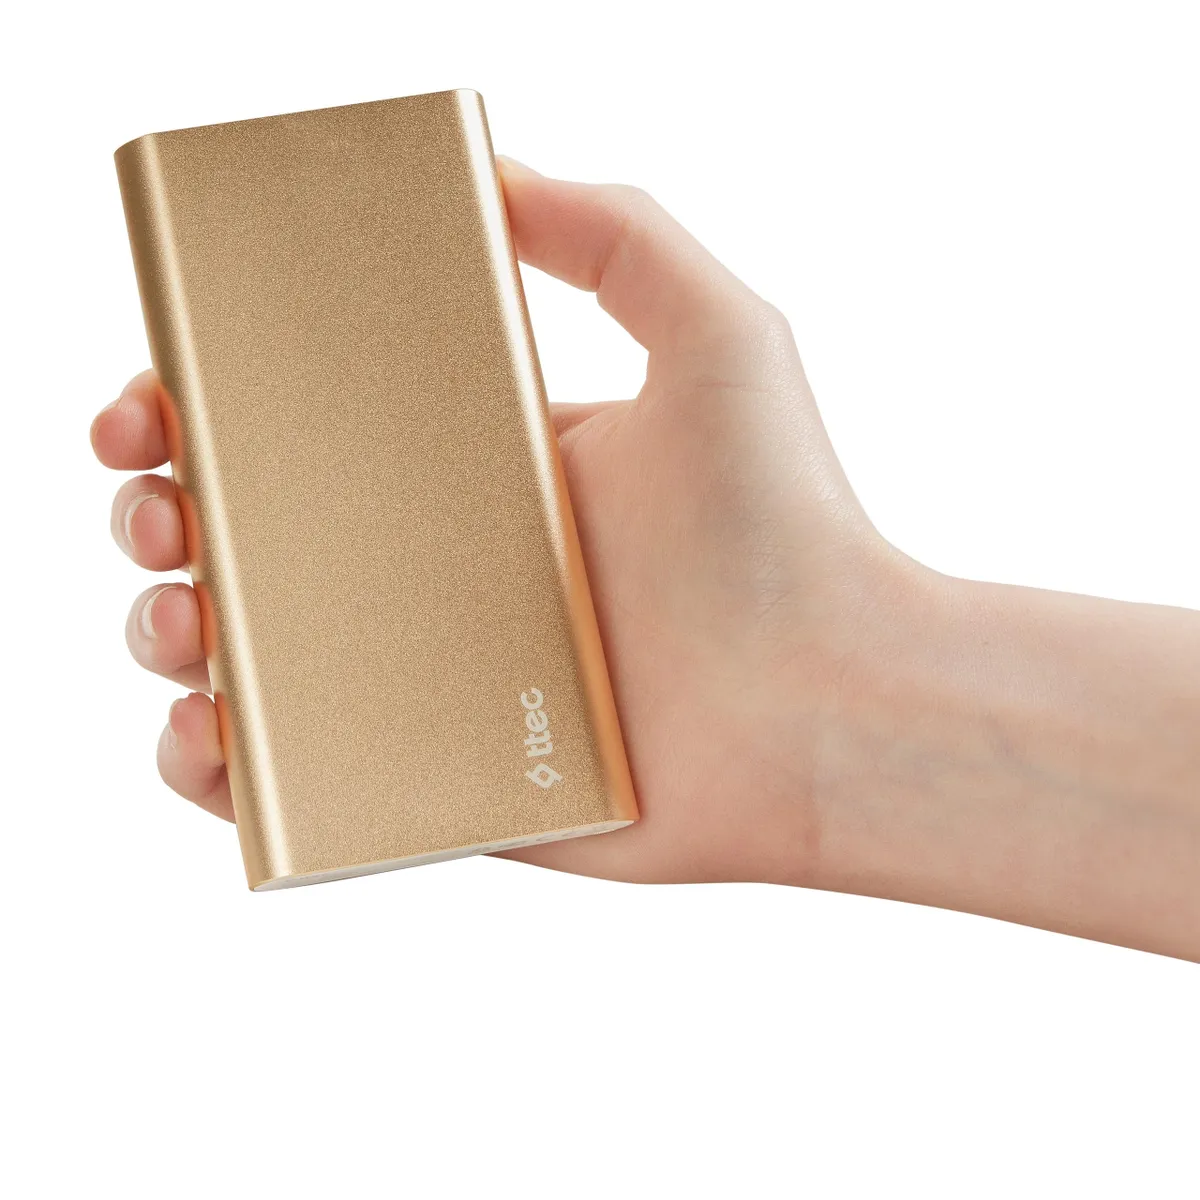 ttec AlumiSlim S Universal Mobile Charger Power Bank 10000 mAh in gold size comparison to hand.